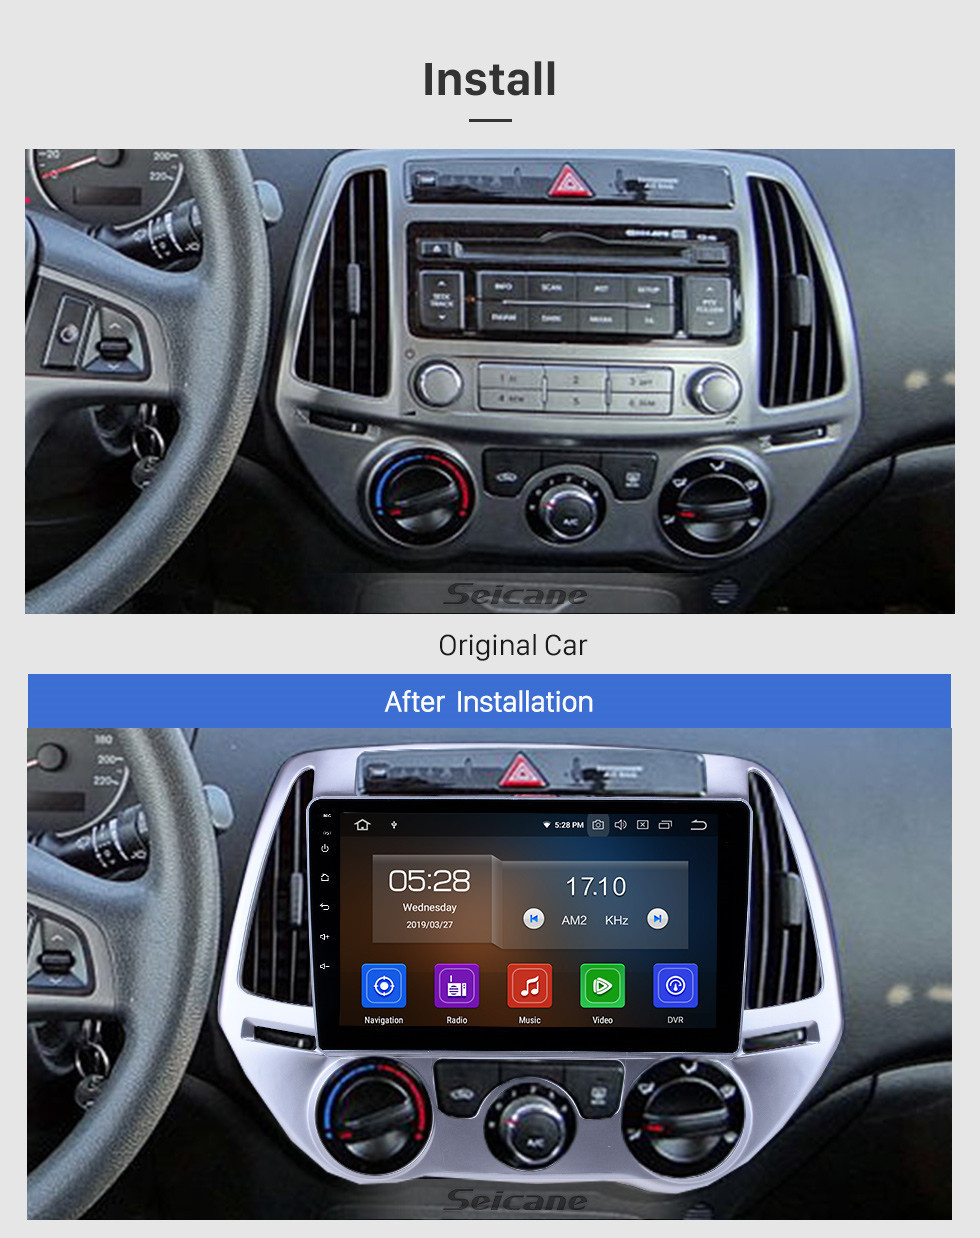 Seicane 9 inch Android 11.0 Radio for 2012-2014 Hyundai I20 Manual A/C Bluetooth Wifi HD Touchscreen GPS Navigation Carplay AUX support 1080P Video Backup camera